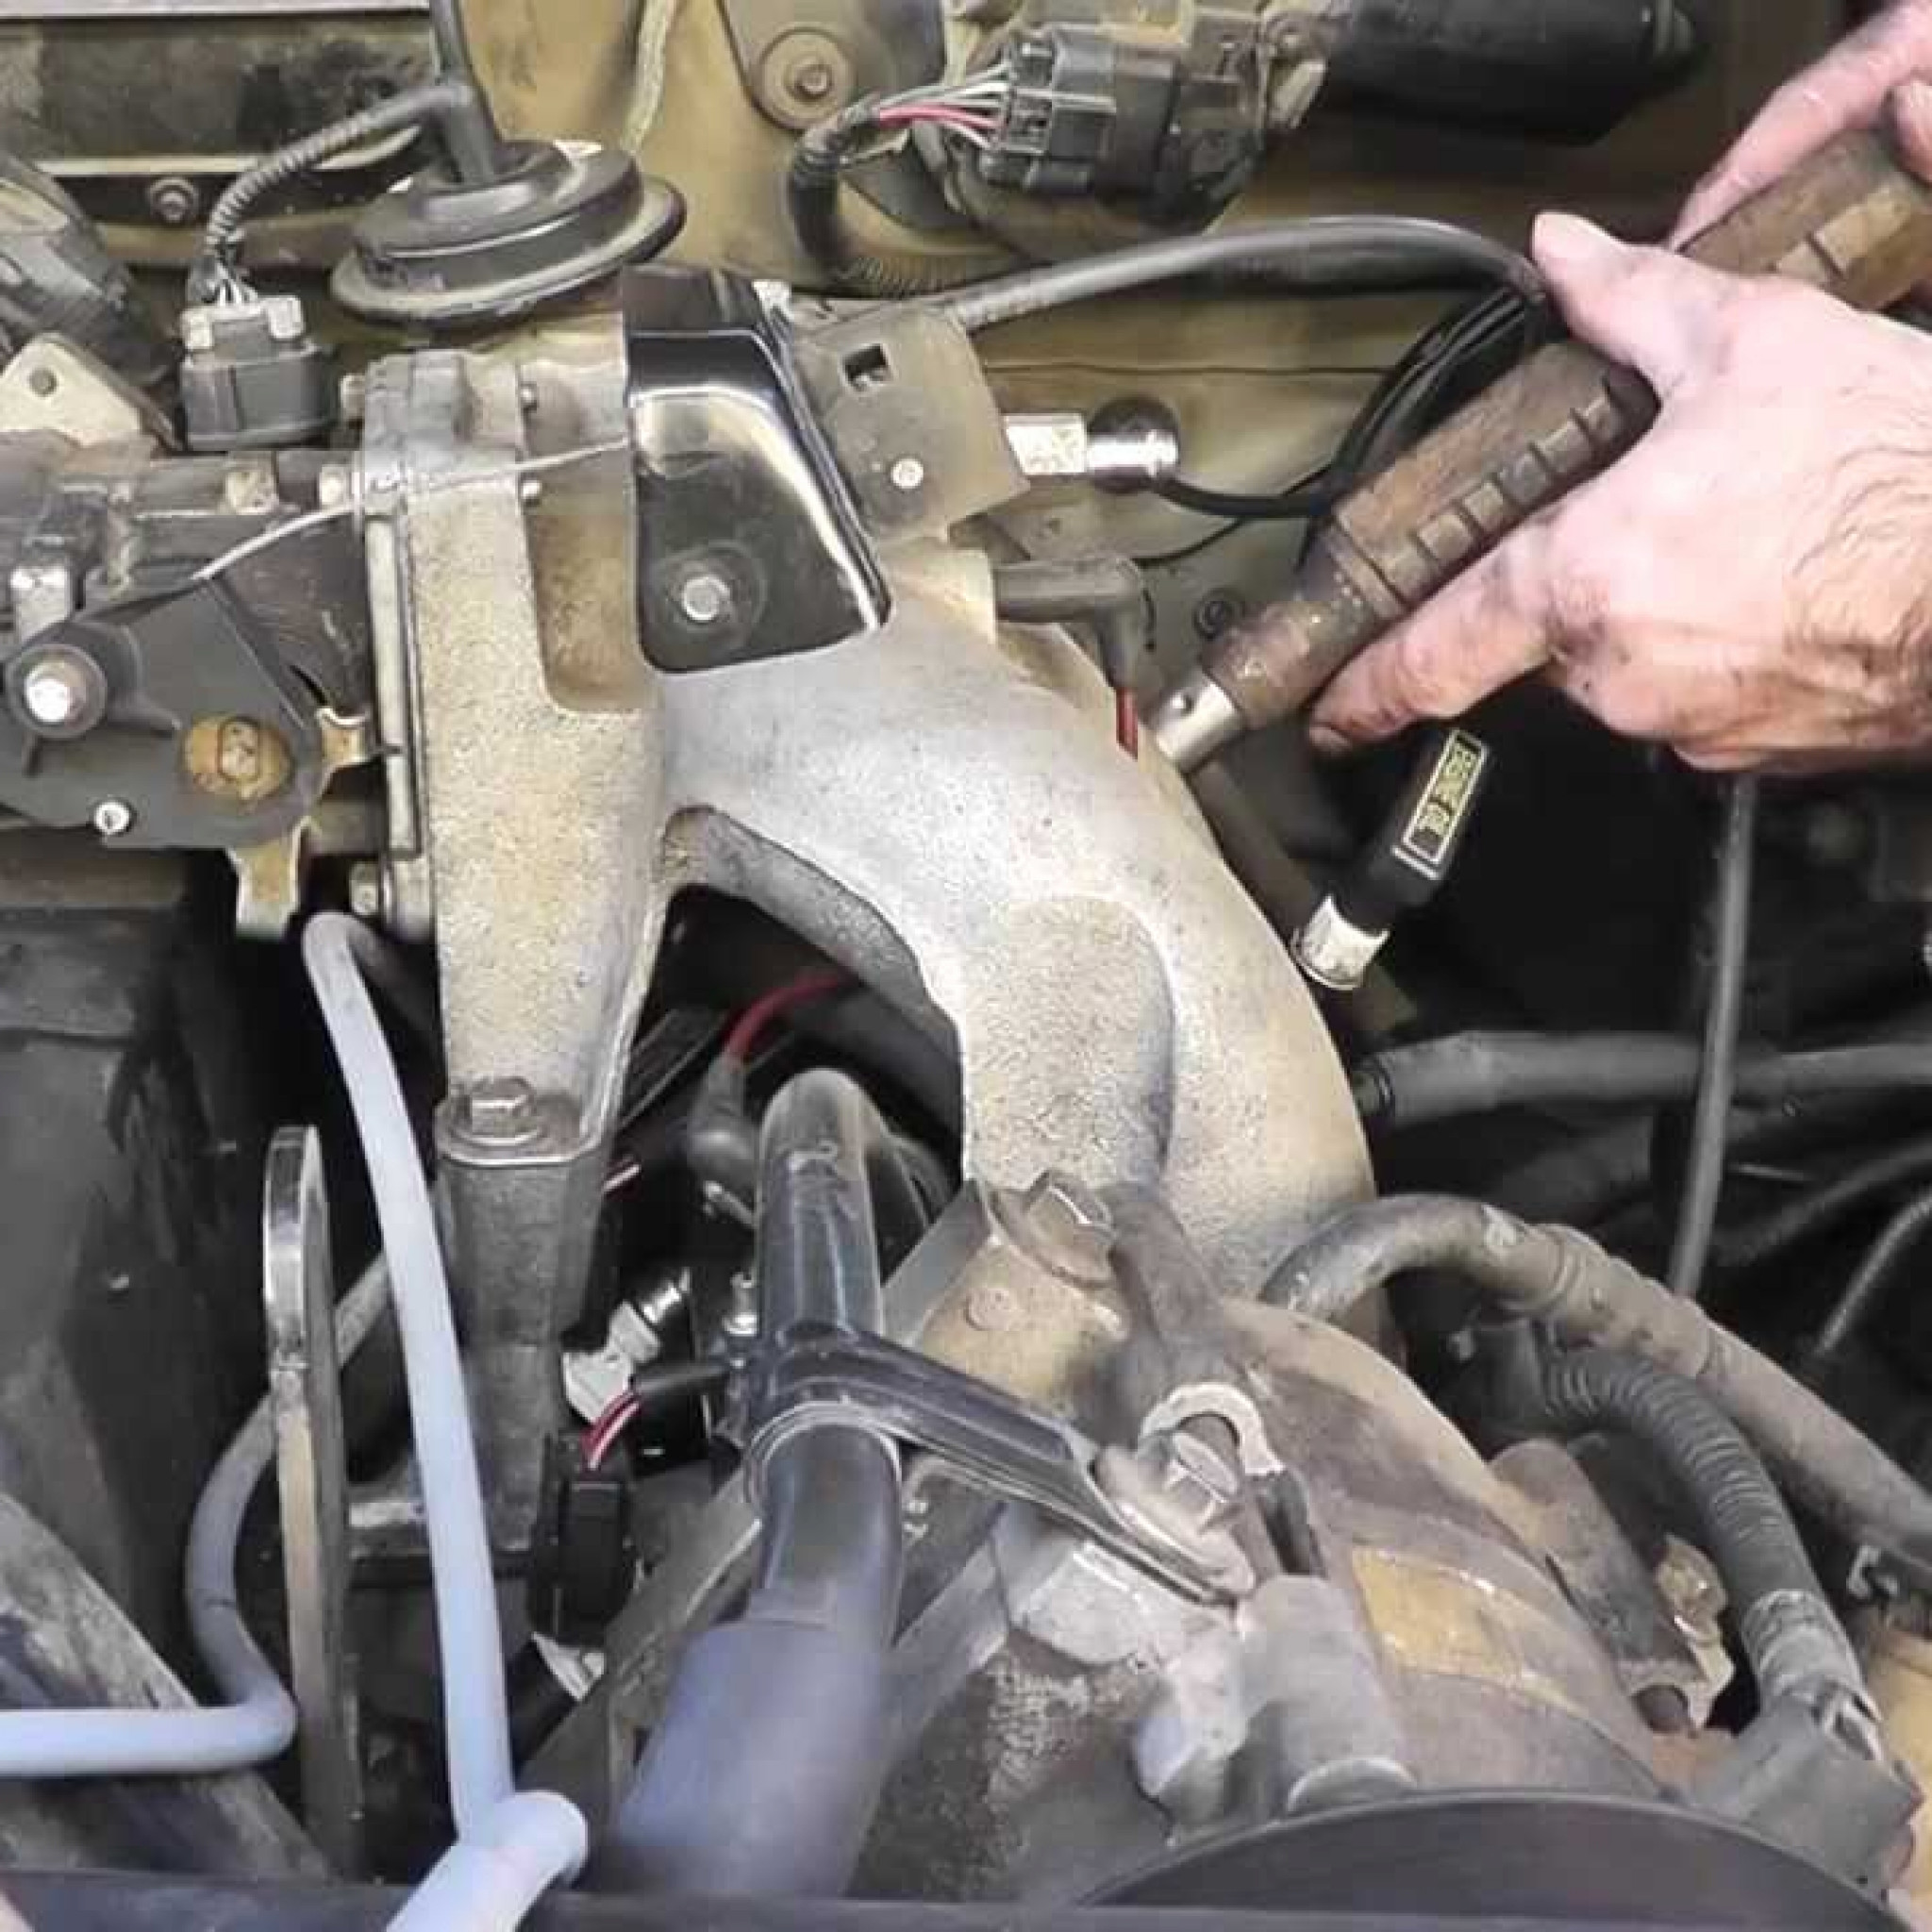 1999 Mazda B2500 Ford Ranger Changing Spark Plugs And Wires Wiring